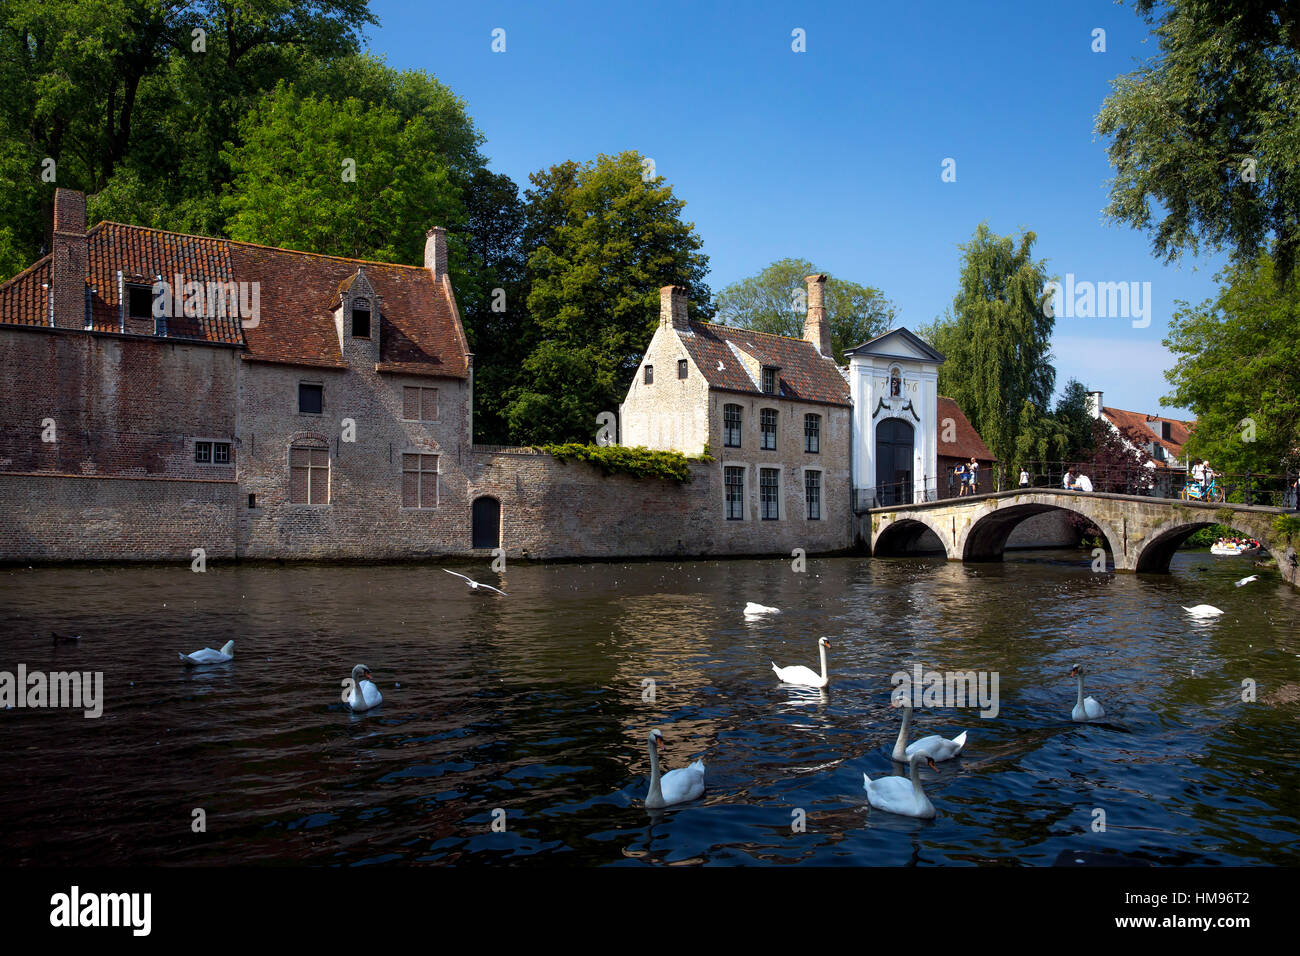 Mute swans (Cygnus olor), at the Minnewater Lake and Begijnhof Bridge with entrance to Beguinage, Bruges, Belgium Stock Photo